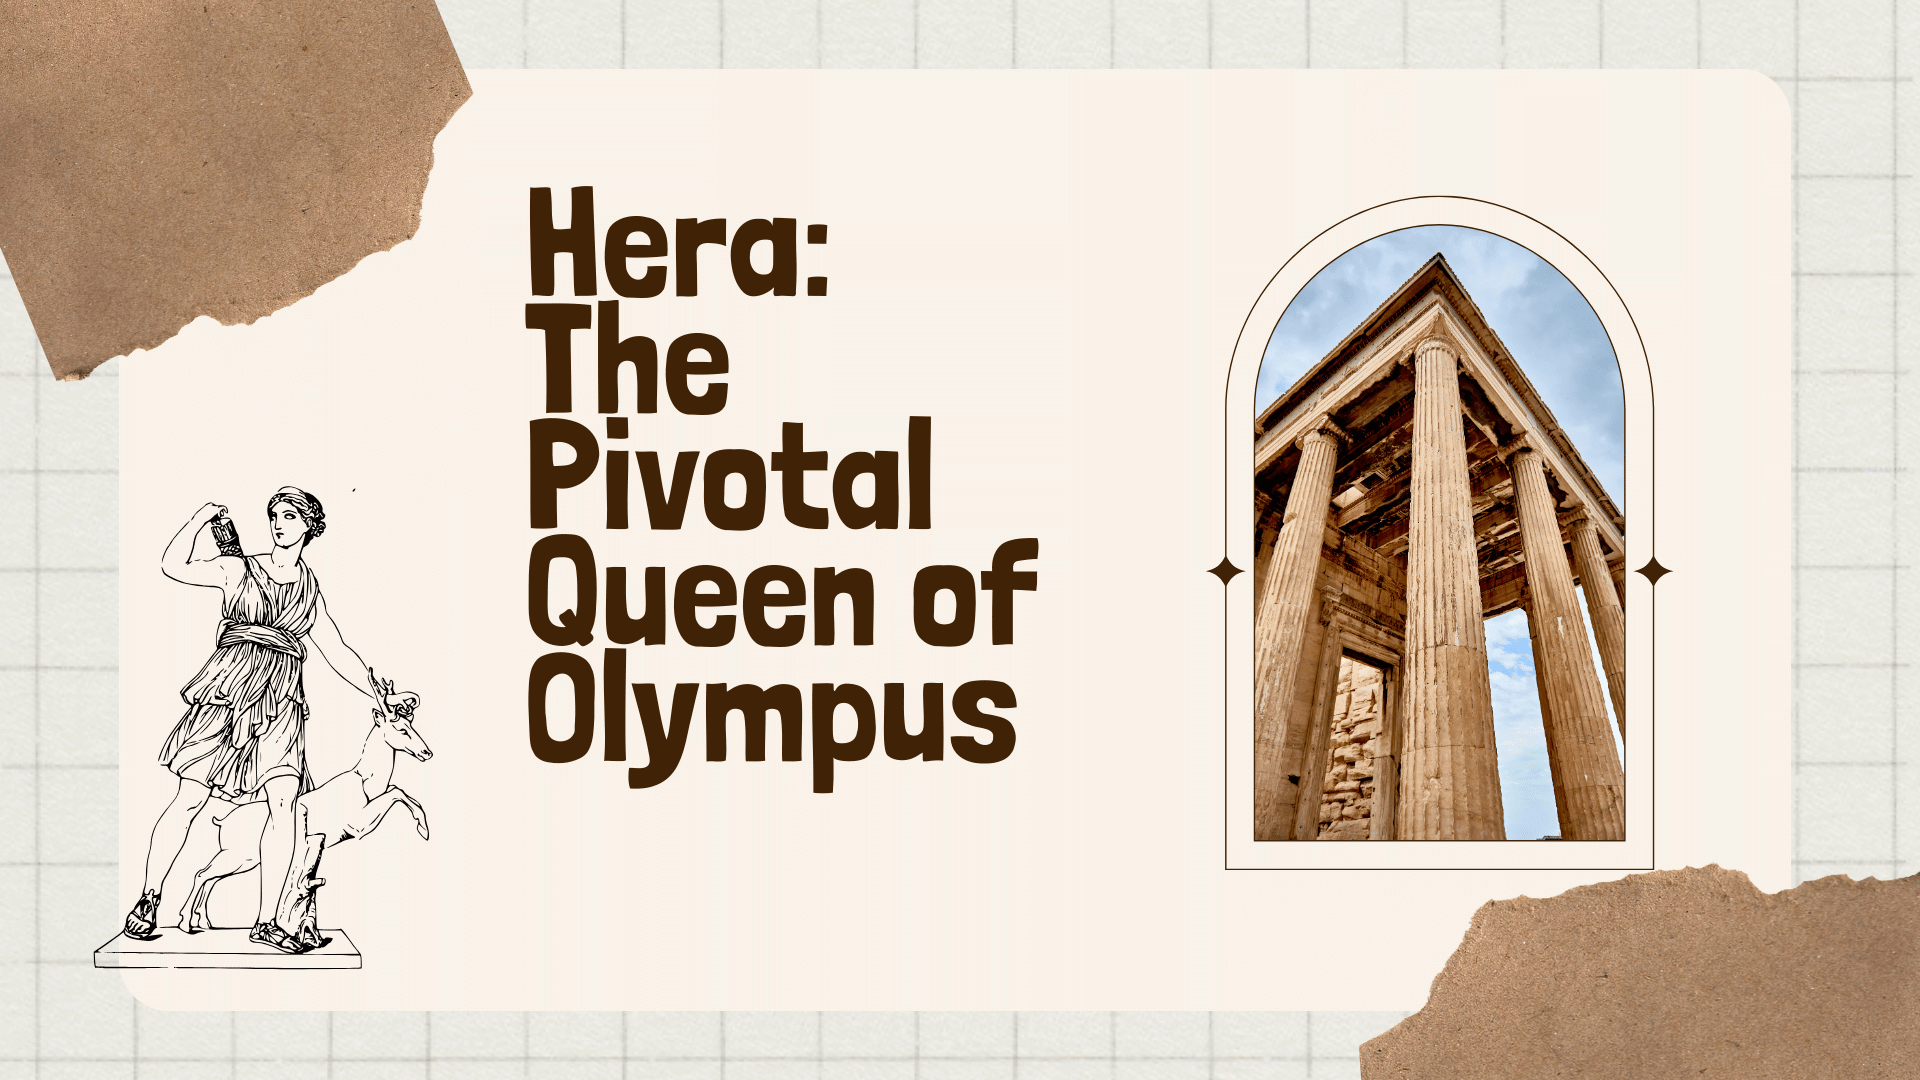 Hera: The Pivotal Queen of Olympus